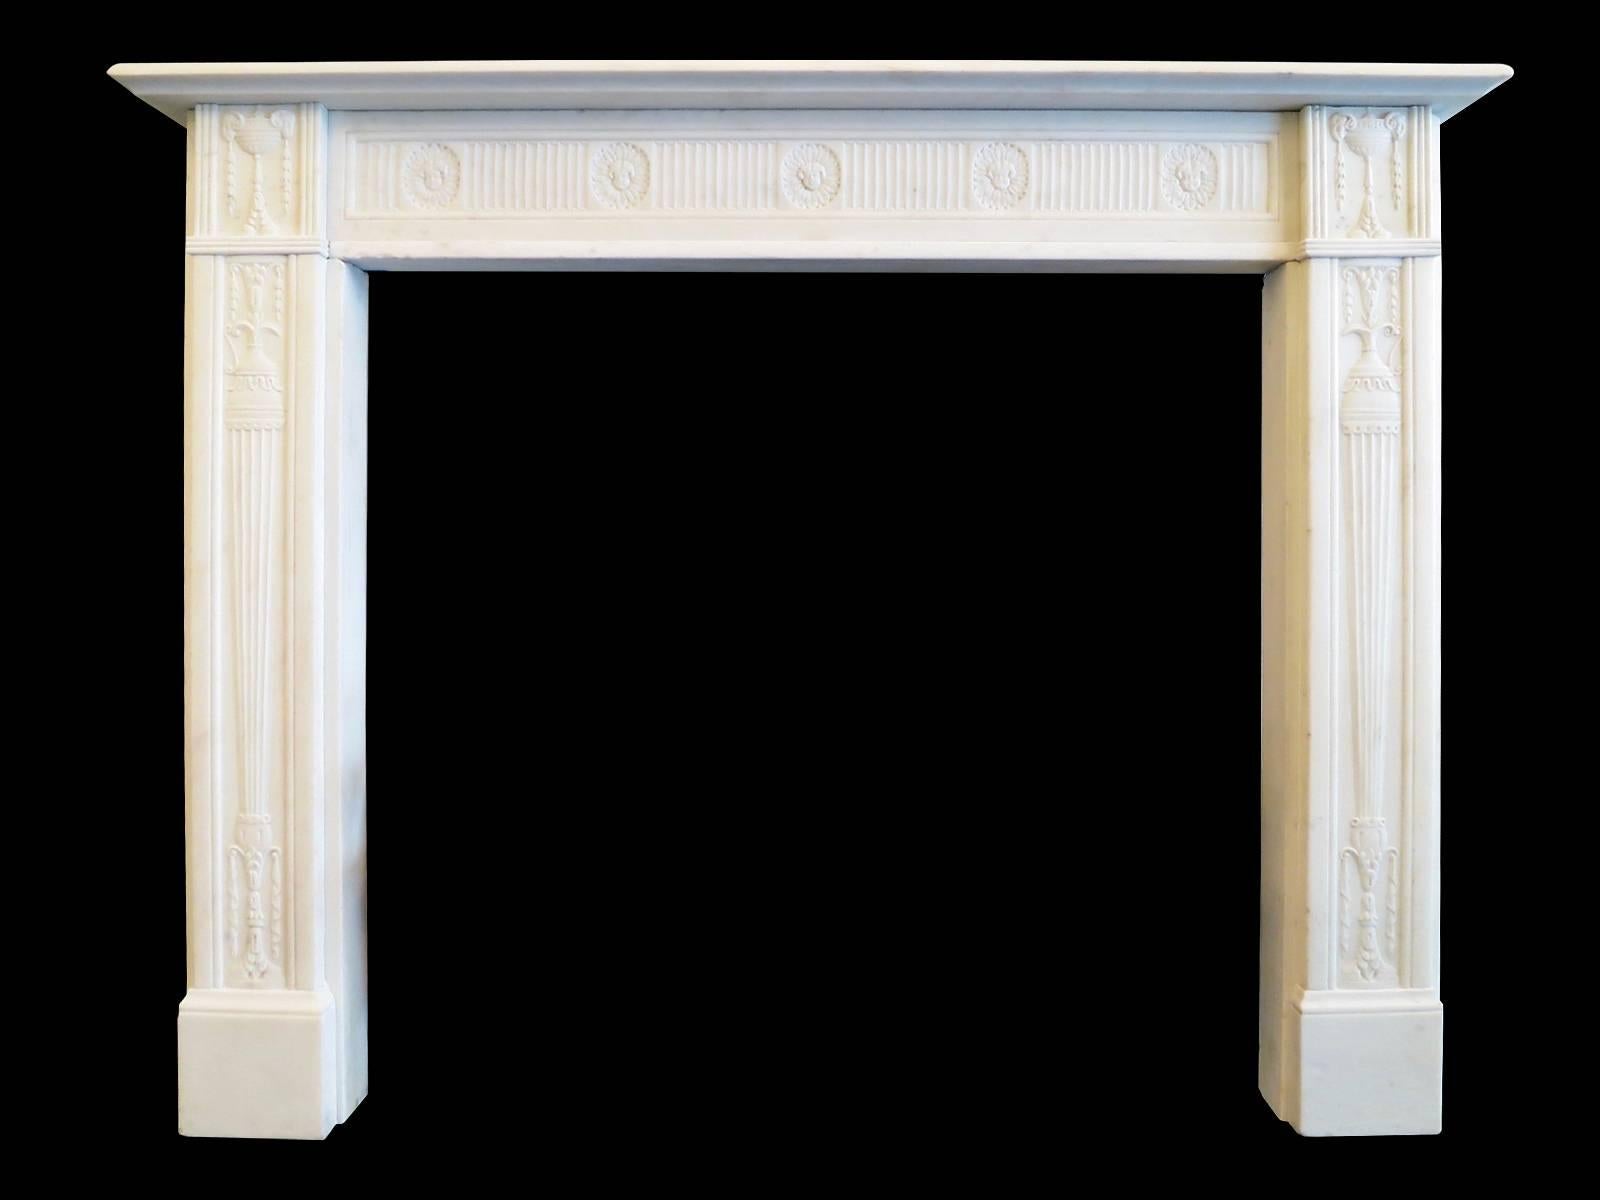 A very fine and well proportioned mantel in Statuary white marble. The jambs having carved tapering pedestals, bell drops and drapery. The corner blocks of classical ram's head urns again with descending bell drops, flanking a running carved bow